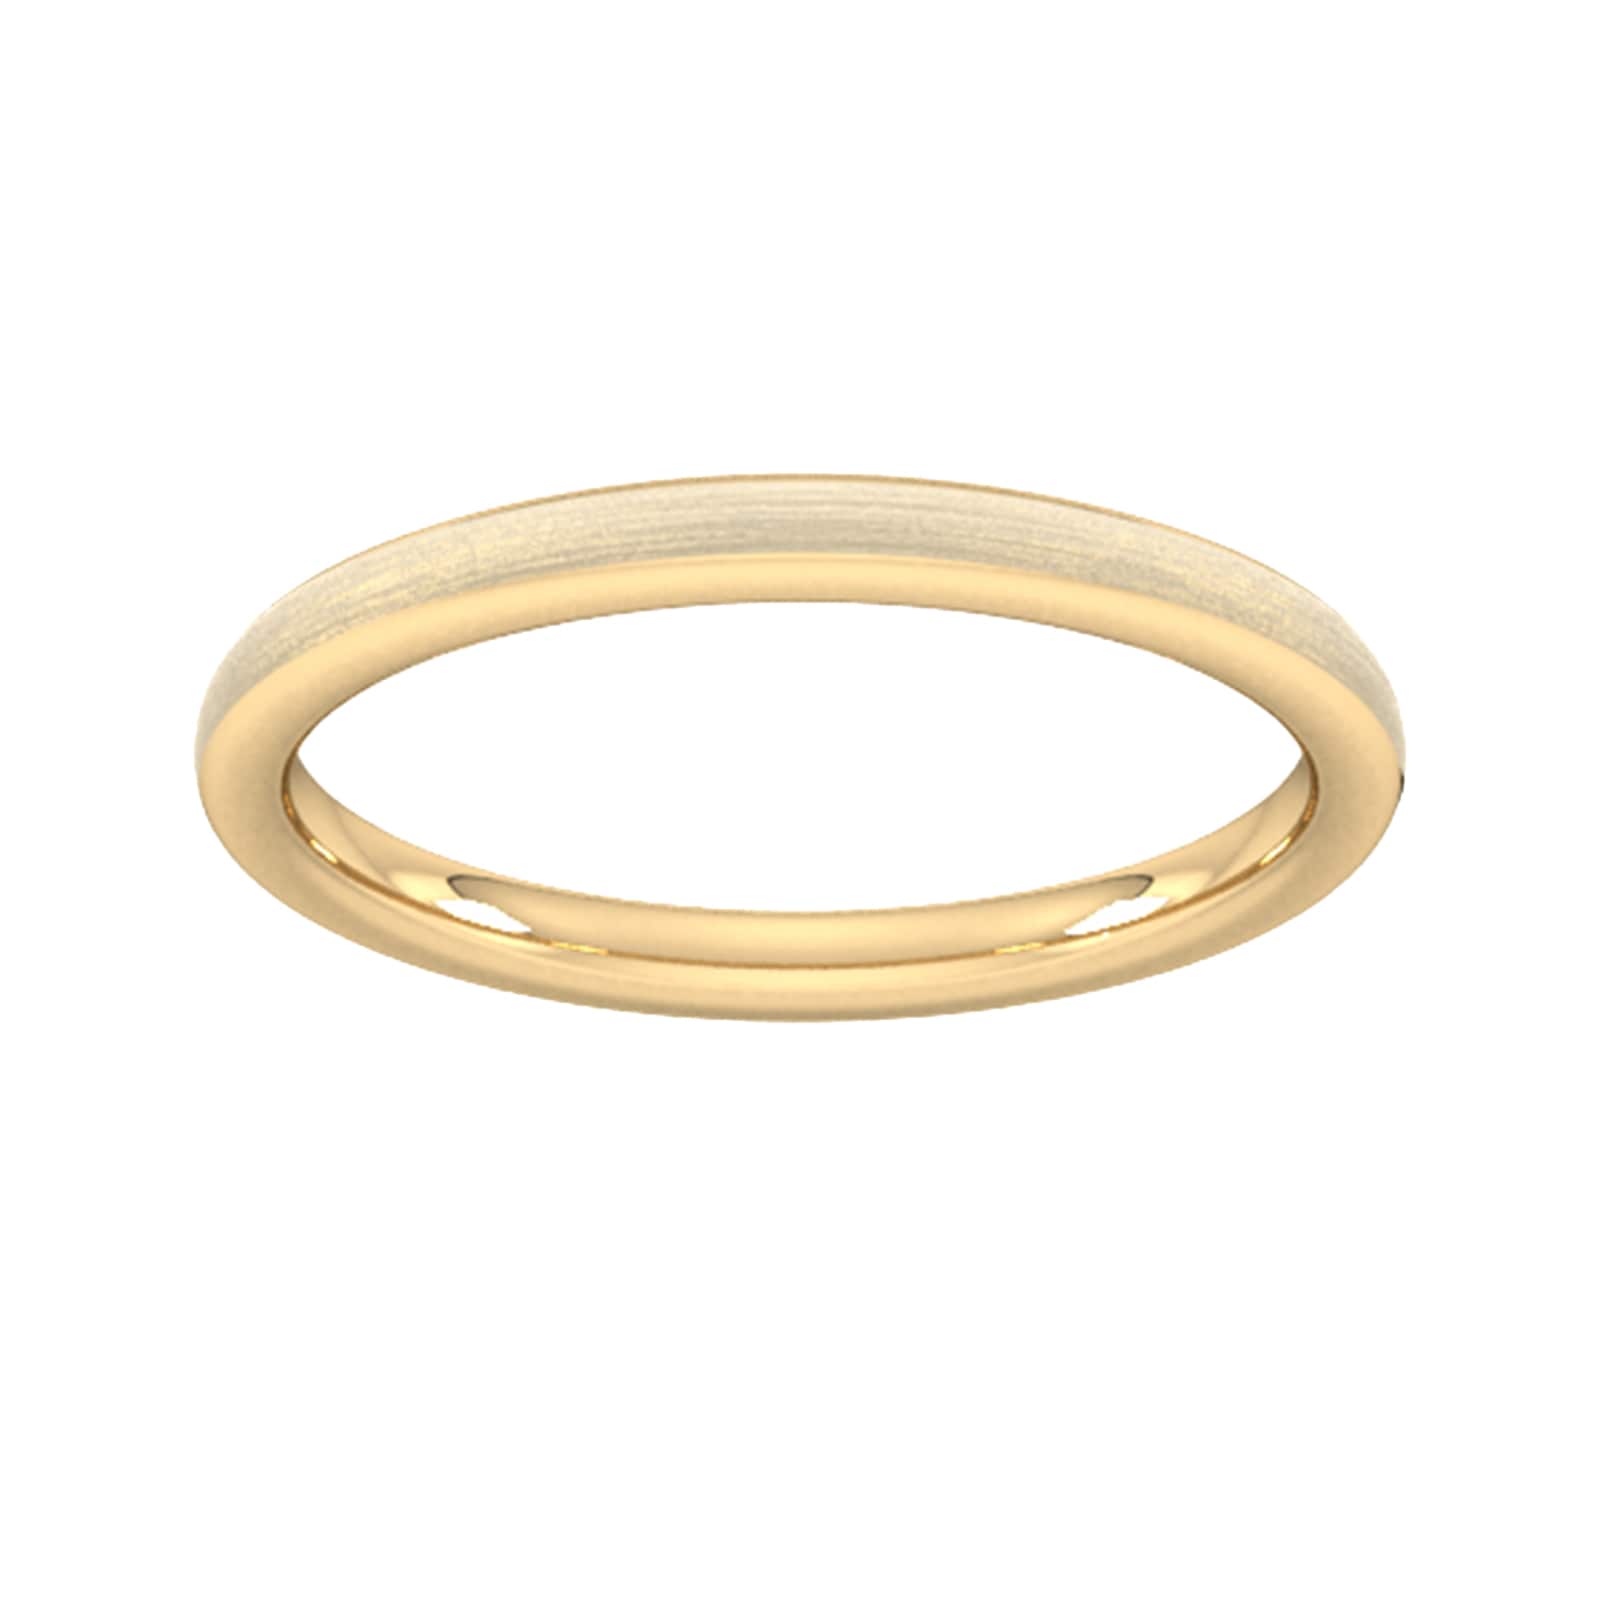 2mm D Shape Heavy Matt Finished Wedding Ring In 9 Carat Yellow Gold - Ring Size R